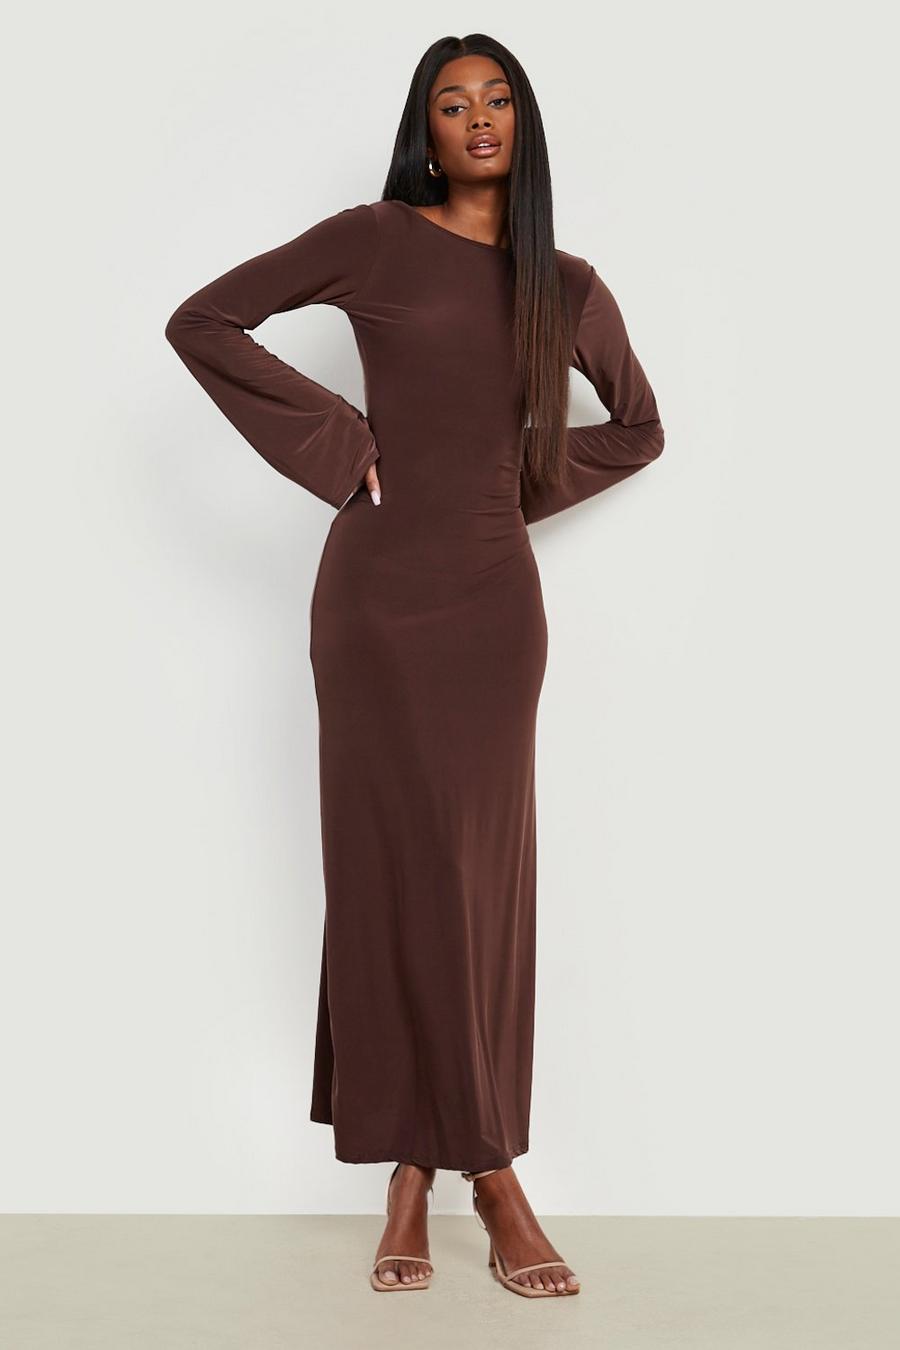 Heavy Soft Touch Low Back Maxi Dress, Chocolate marrón